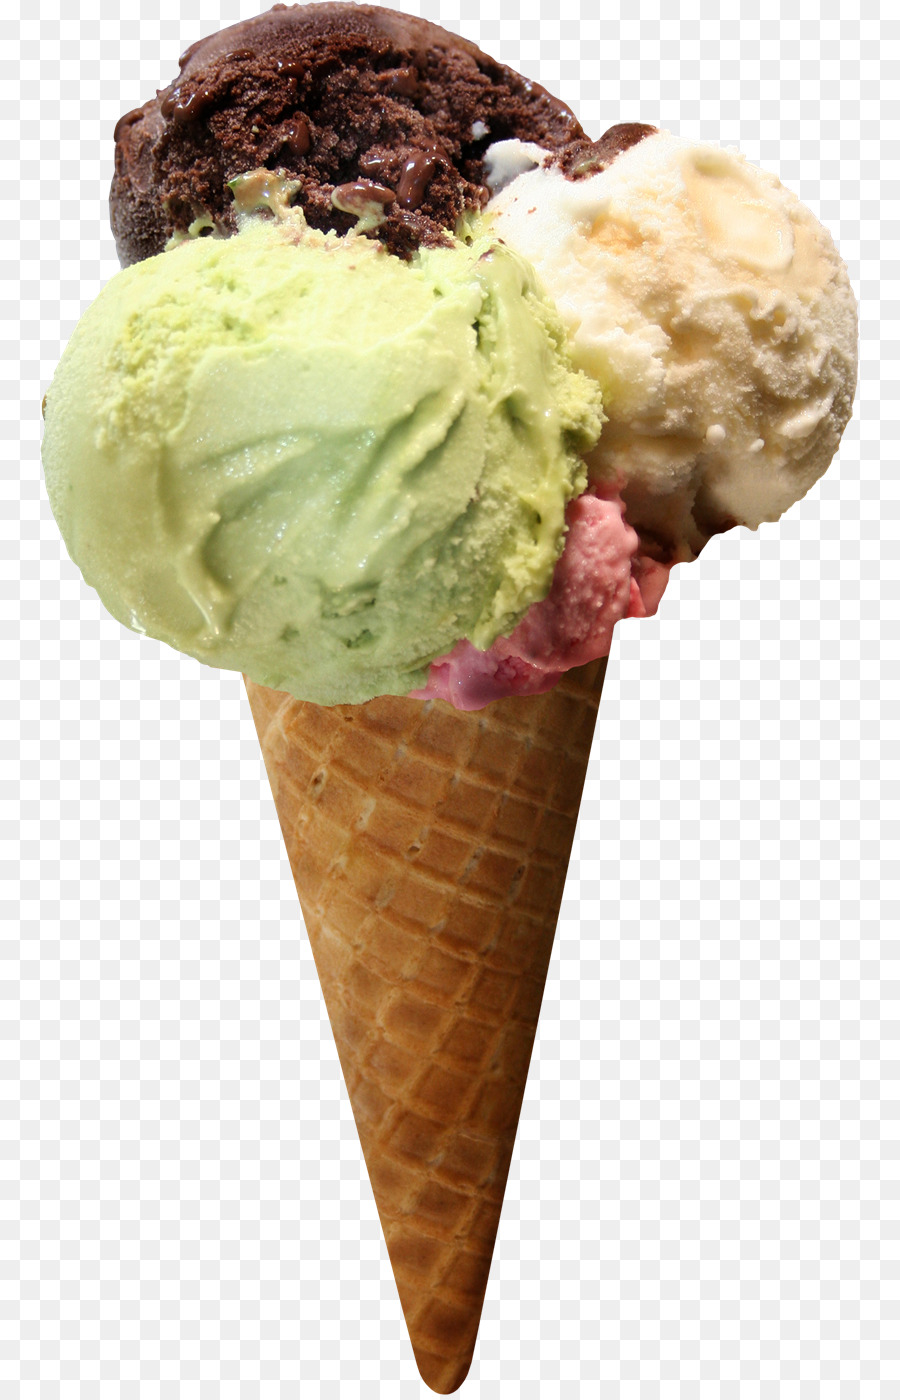 Ice cream Joy Diet: 10 Daily Practices for a Happier Life St Aloysius Church Food Meal - Ice Cream Cone PNG Transparent Image png download - 819*1395 - Free Transparent Ice Cream png Download.